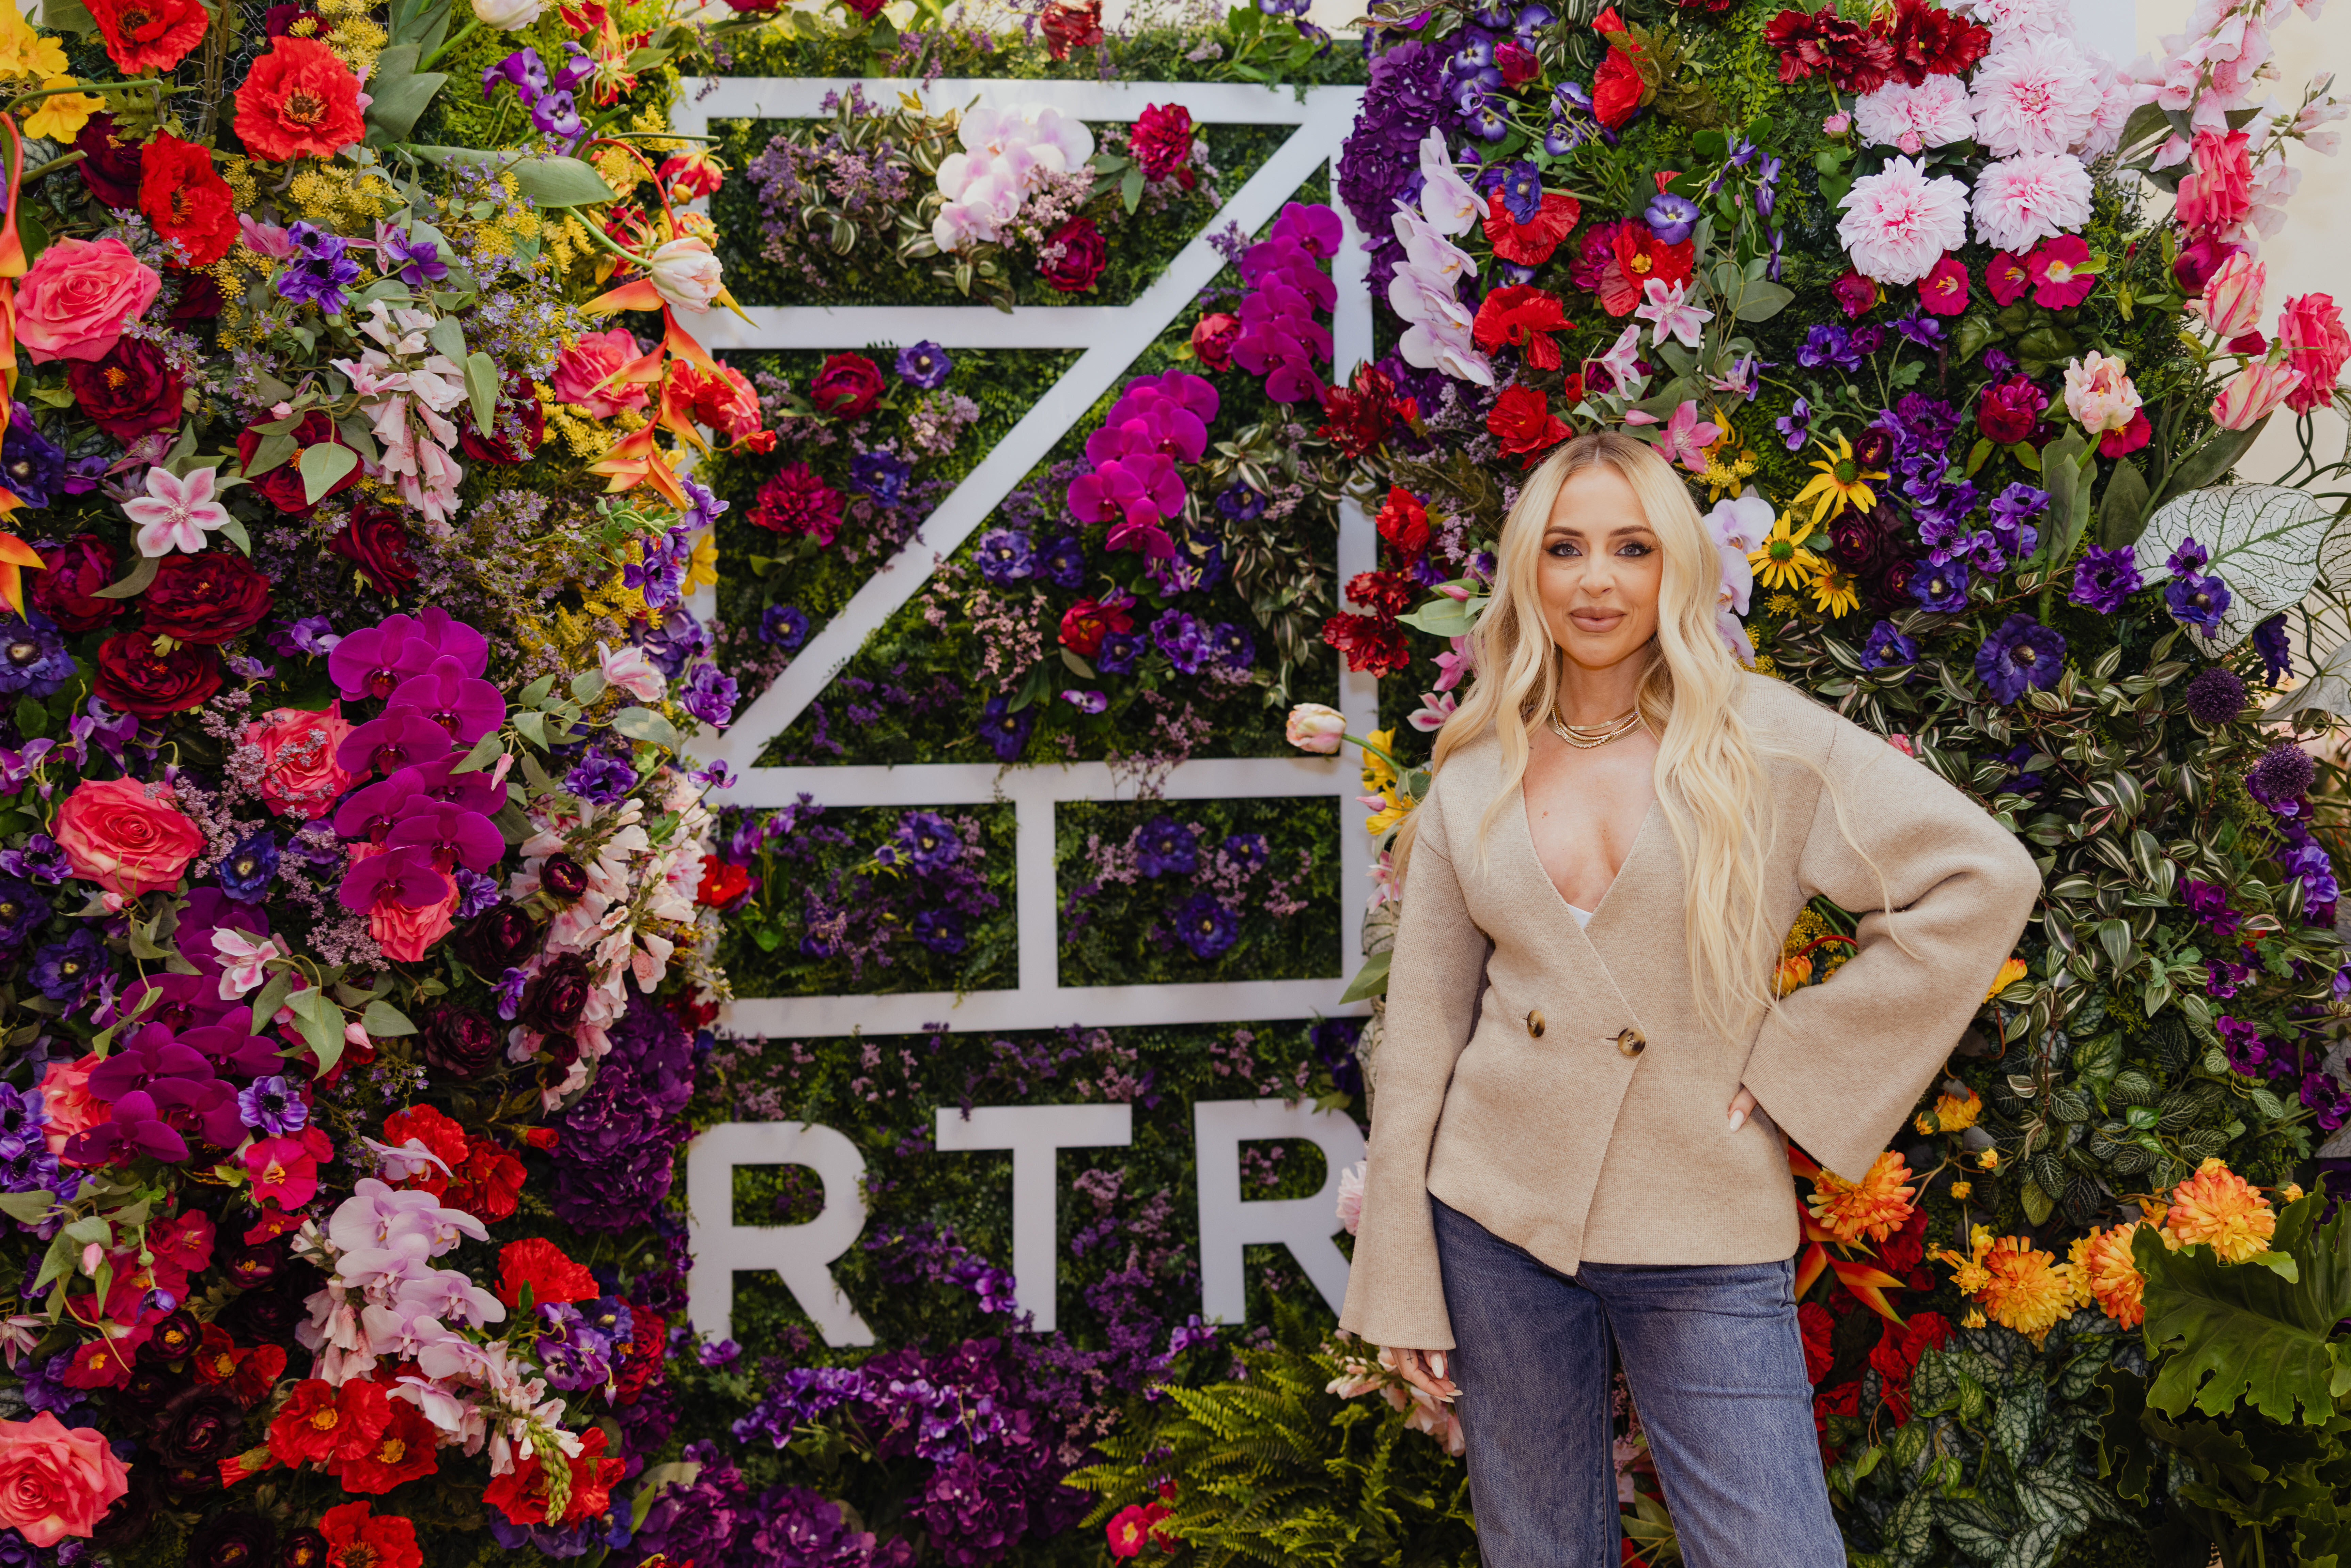 Stylist Maeve Reilly stands in tan blazer and jeans next to colorful Rent the Runway signage.